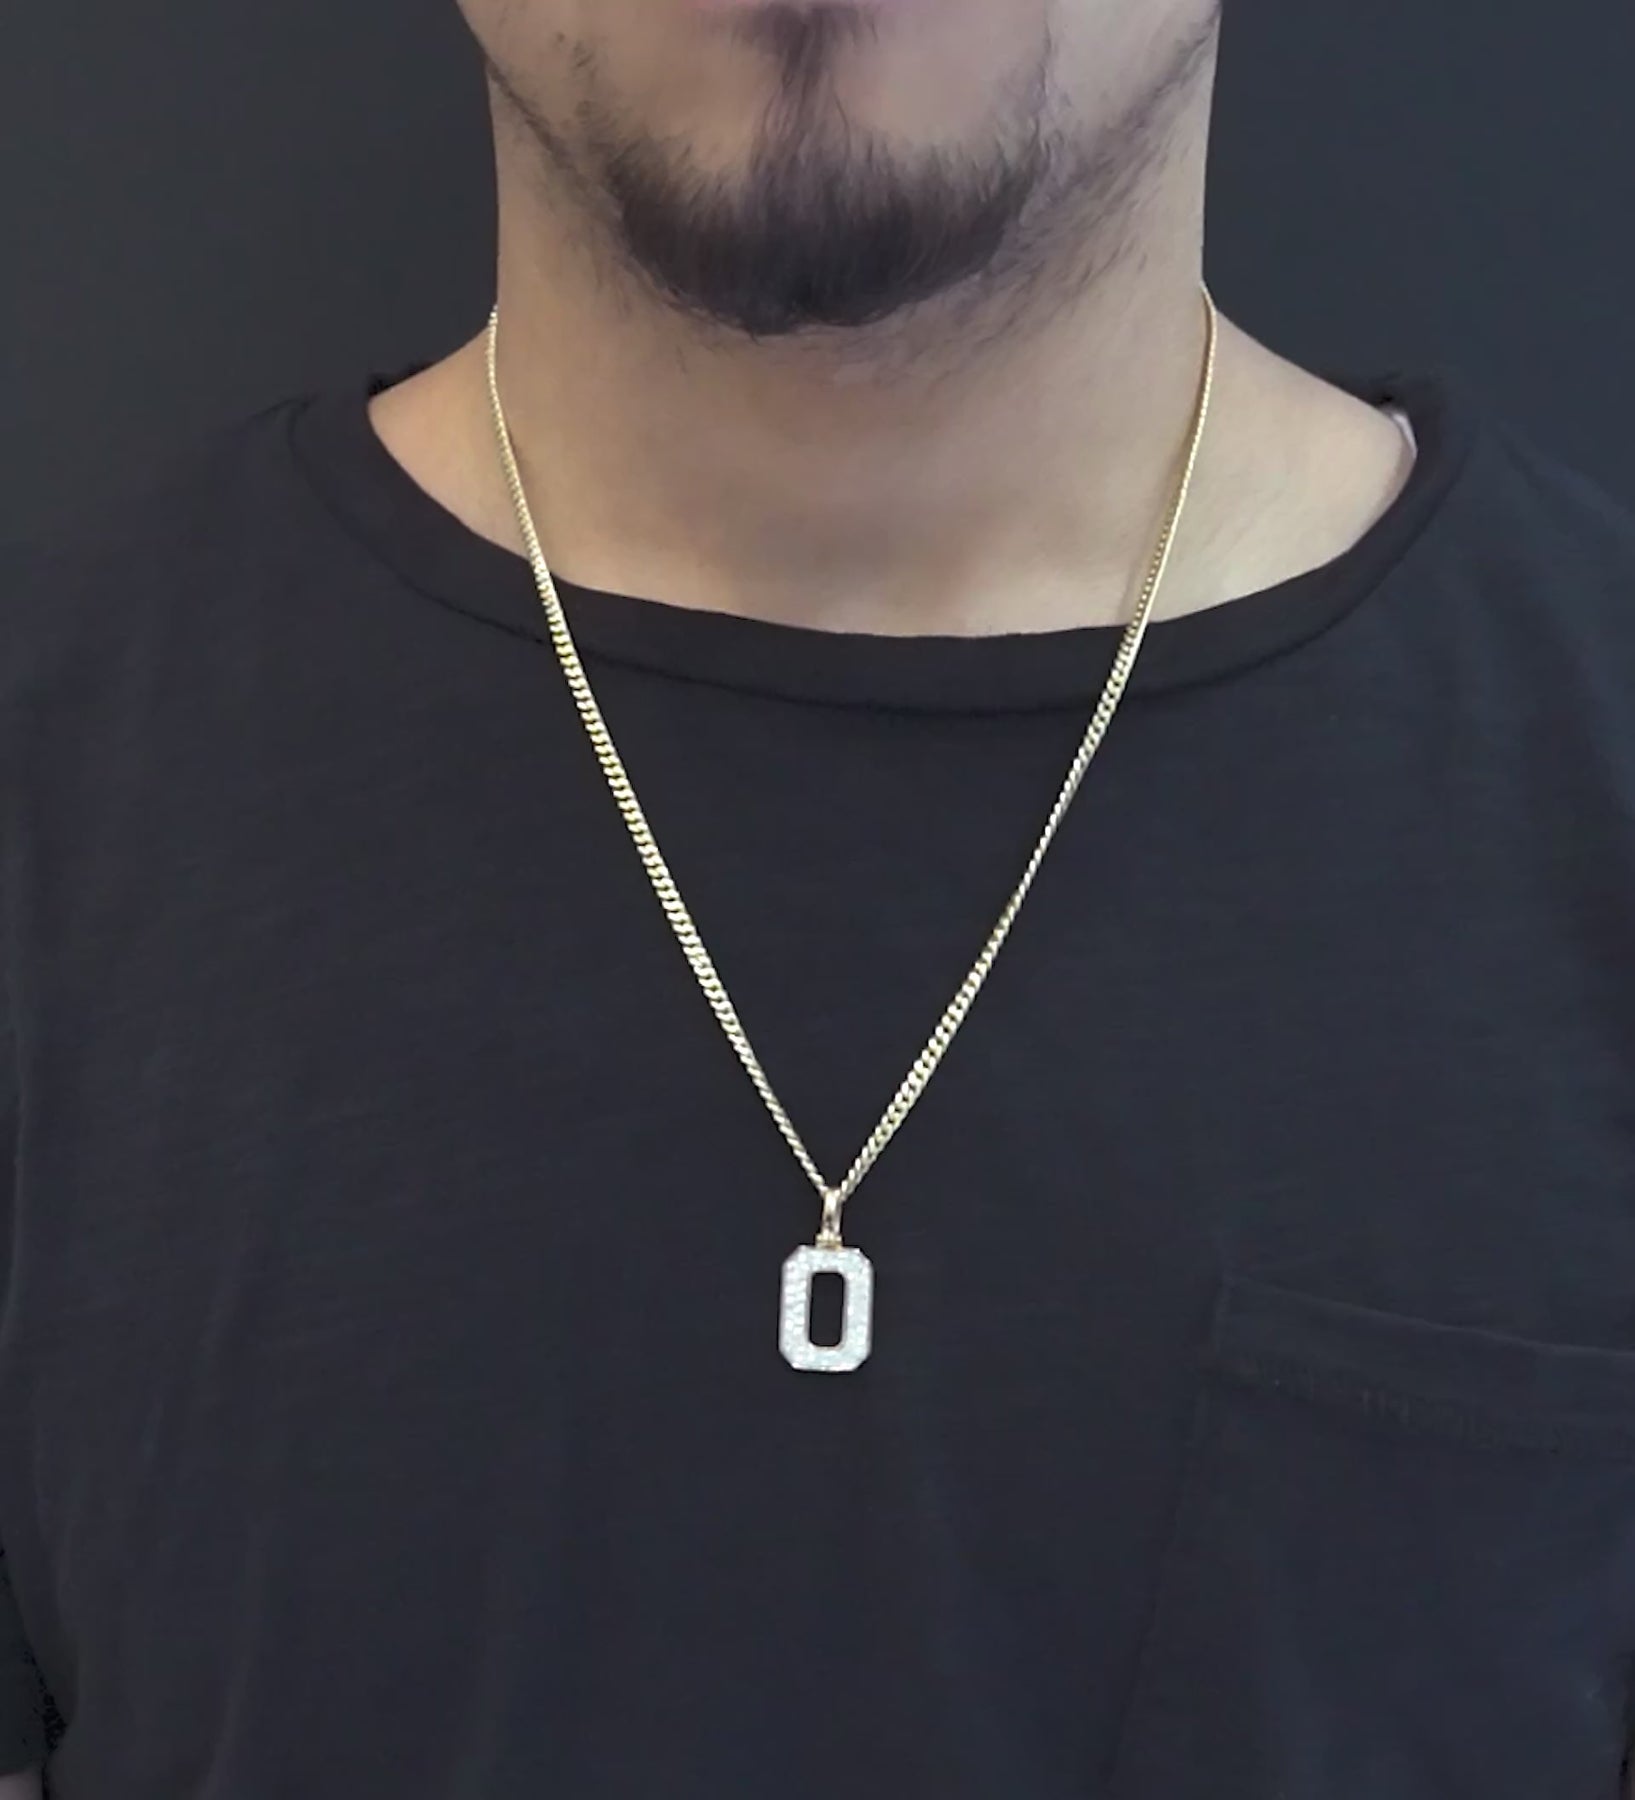 Off-White c/o Virgil Abloh Paperclip Chain Necklace in White for Men